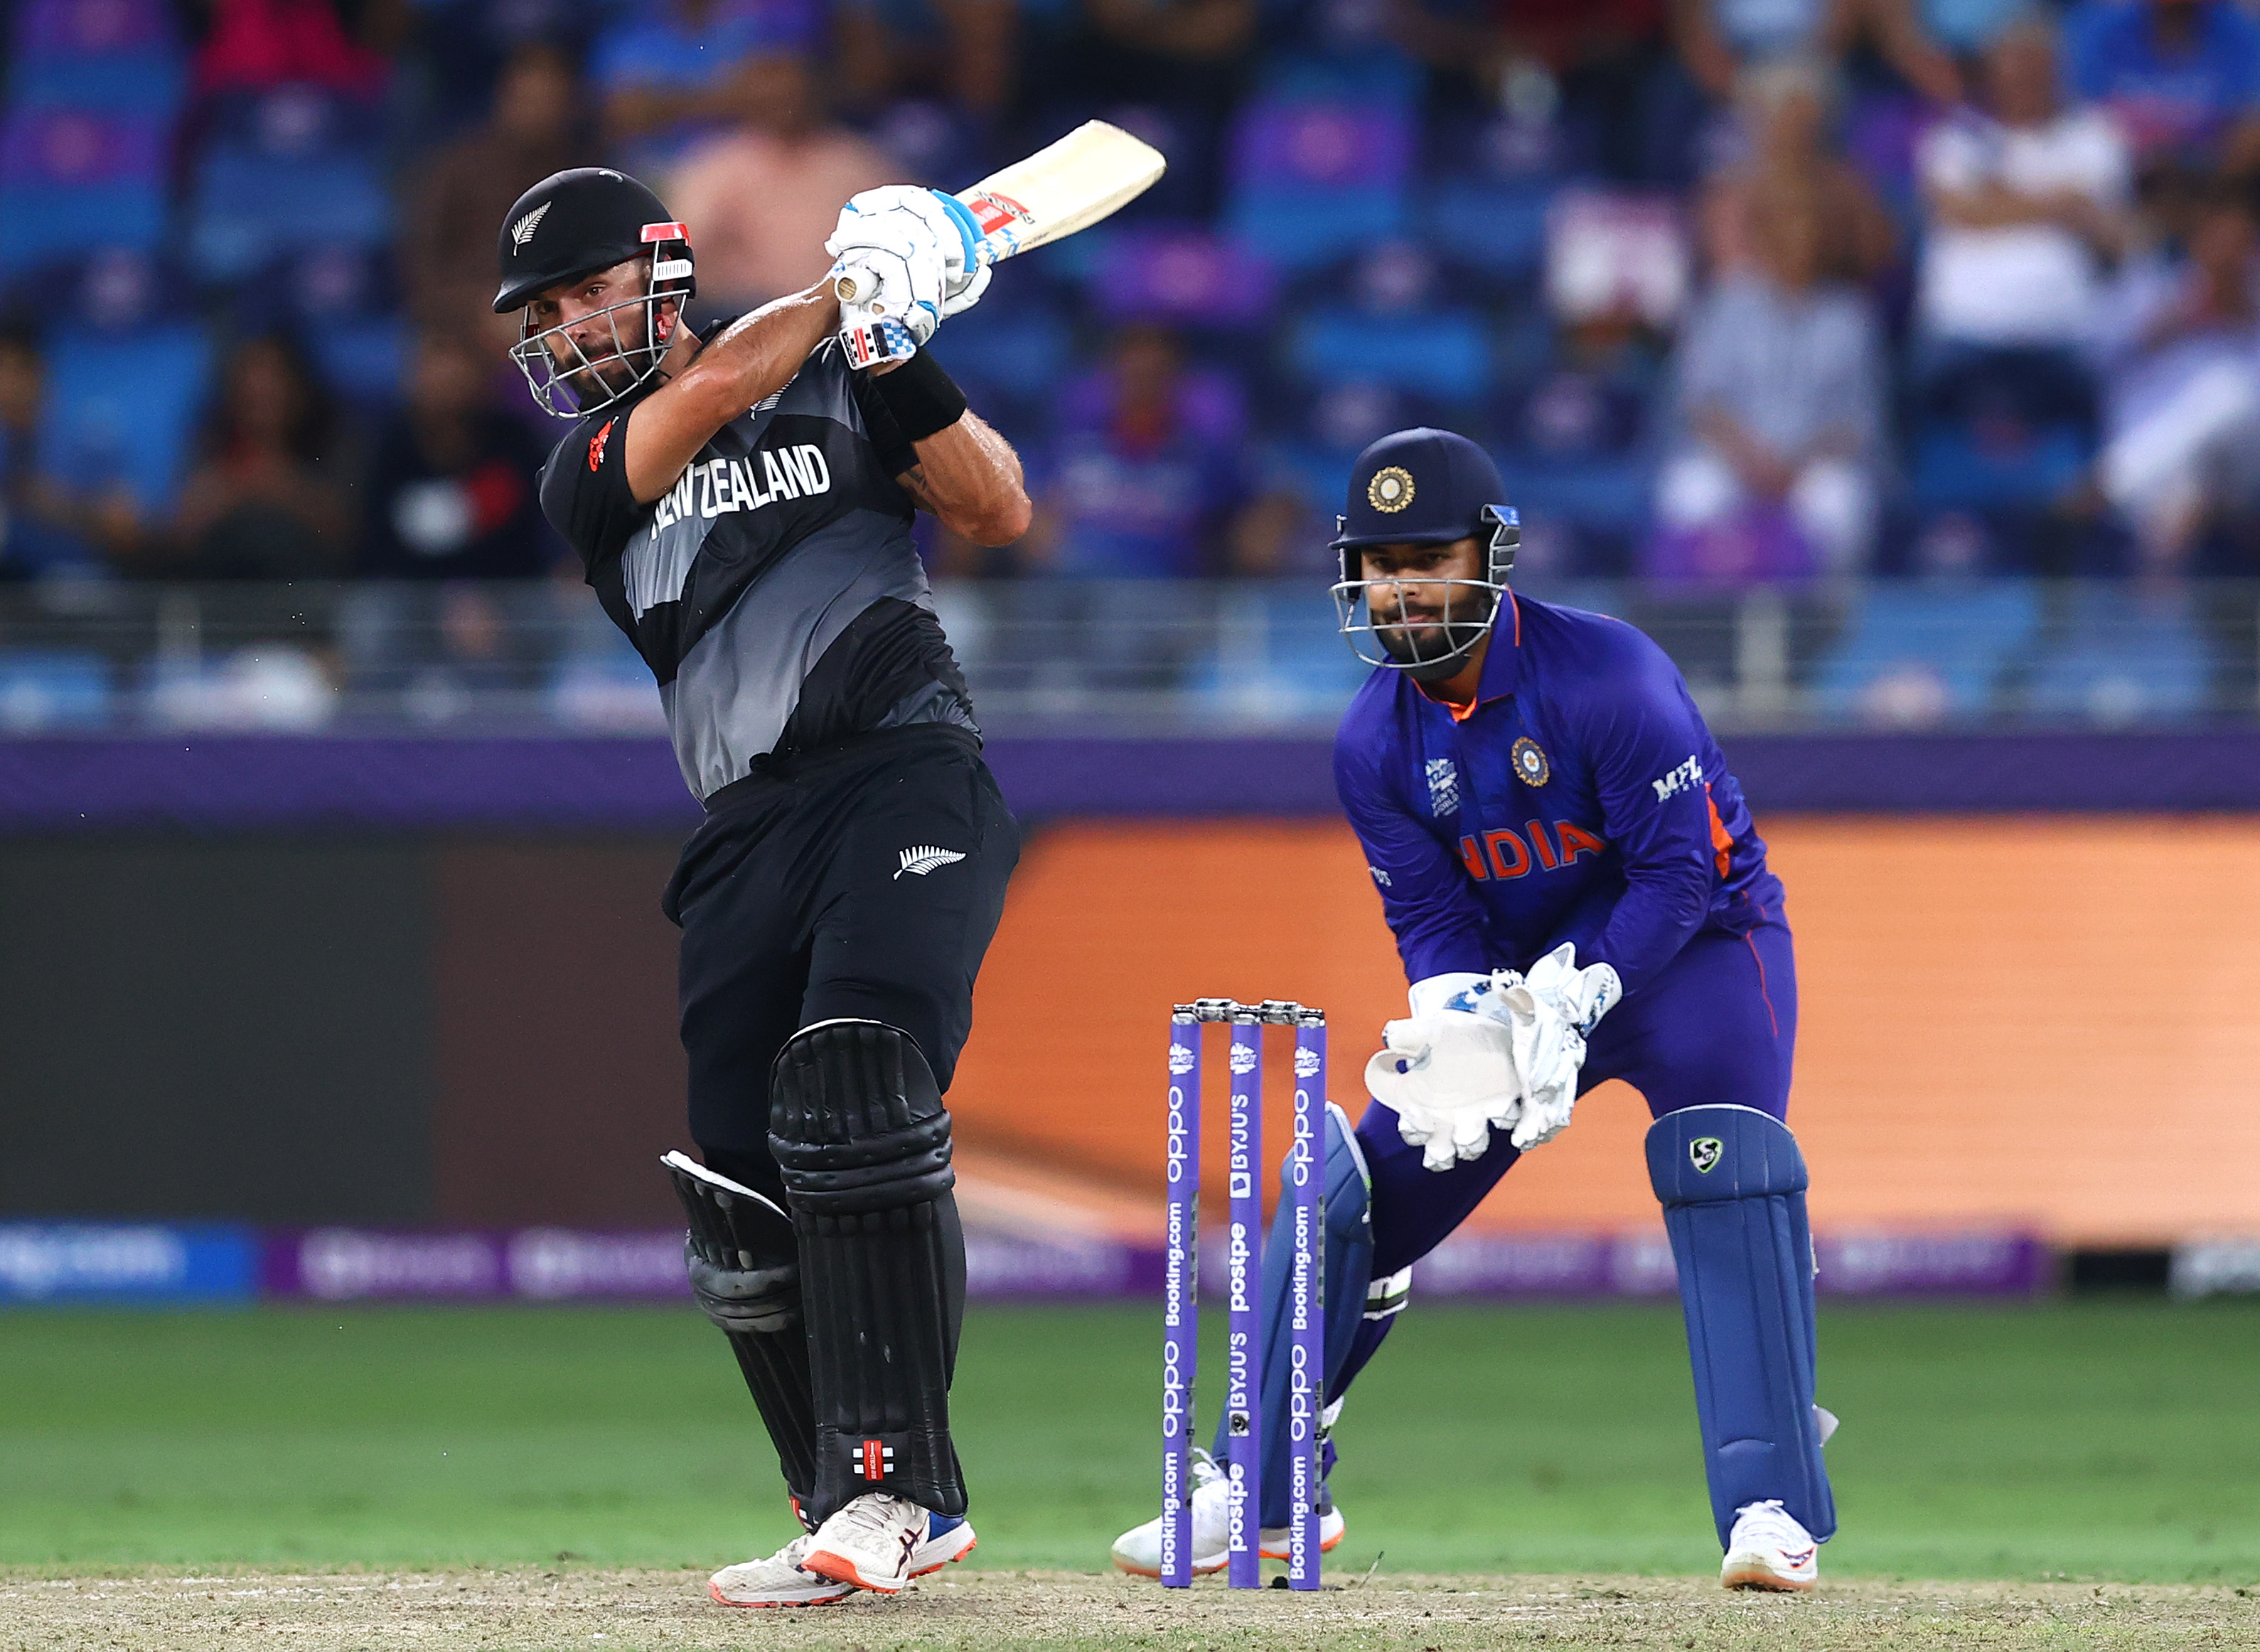 T20 World Cup: Virender Sehwag on India's loss to New Zealand